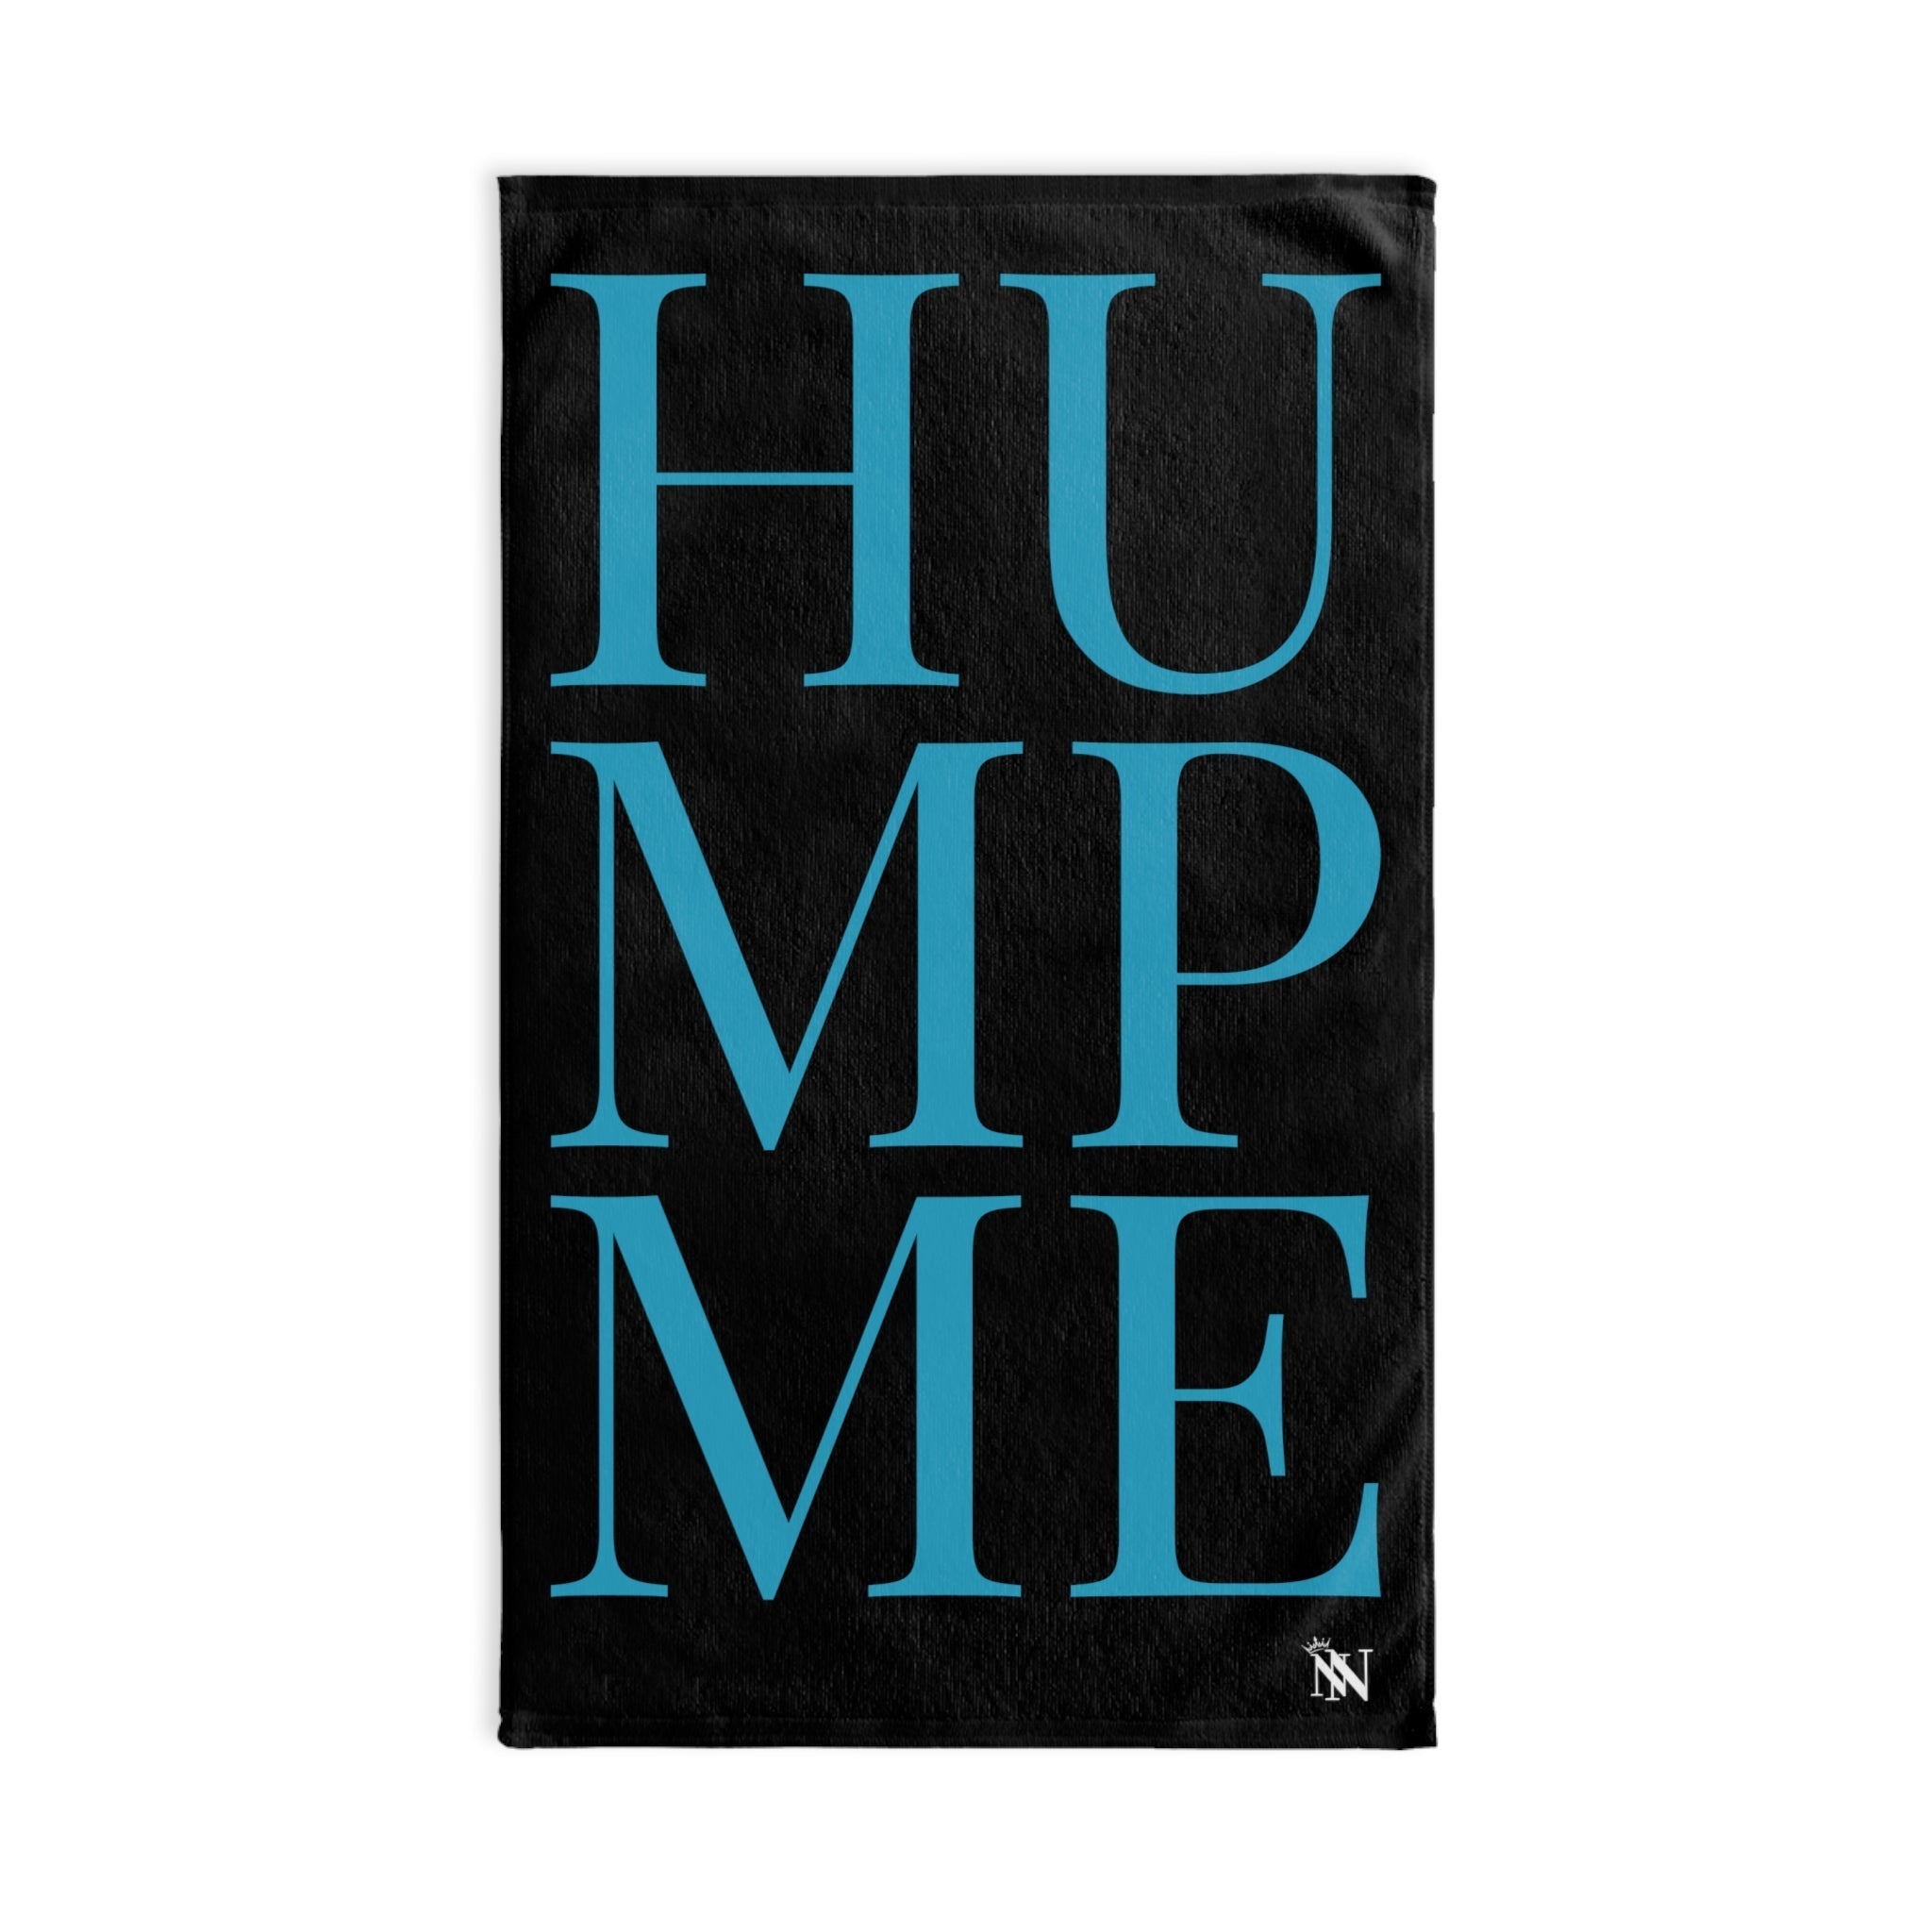 Hump Me Teal Black | Sexy Gifts for Boyfriend, Funny Towel Romantic Gift for Wedding Couple Fiance First Year 2nd Anniversary Valentines, Party Gag Gifts, Joke Humor Cloth for Husband Men BF NECTAR NAPKINS